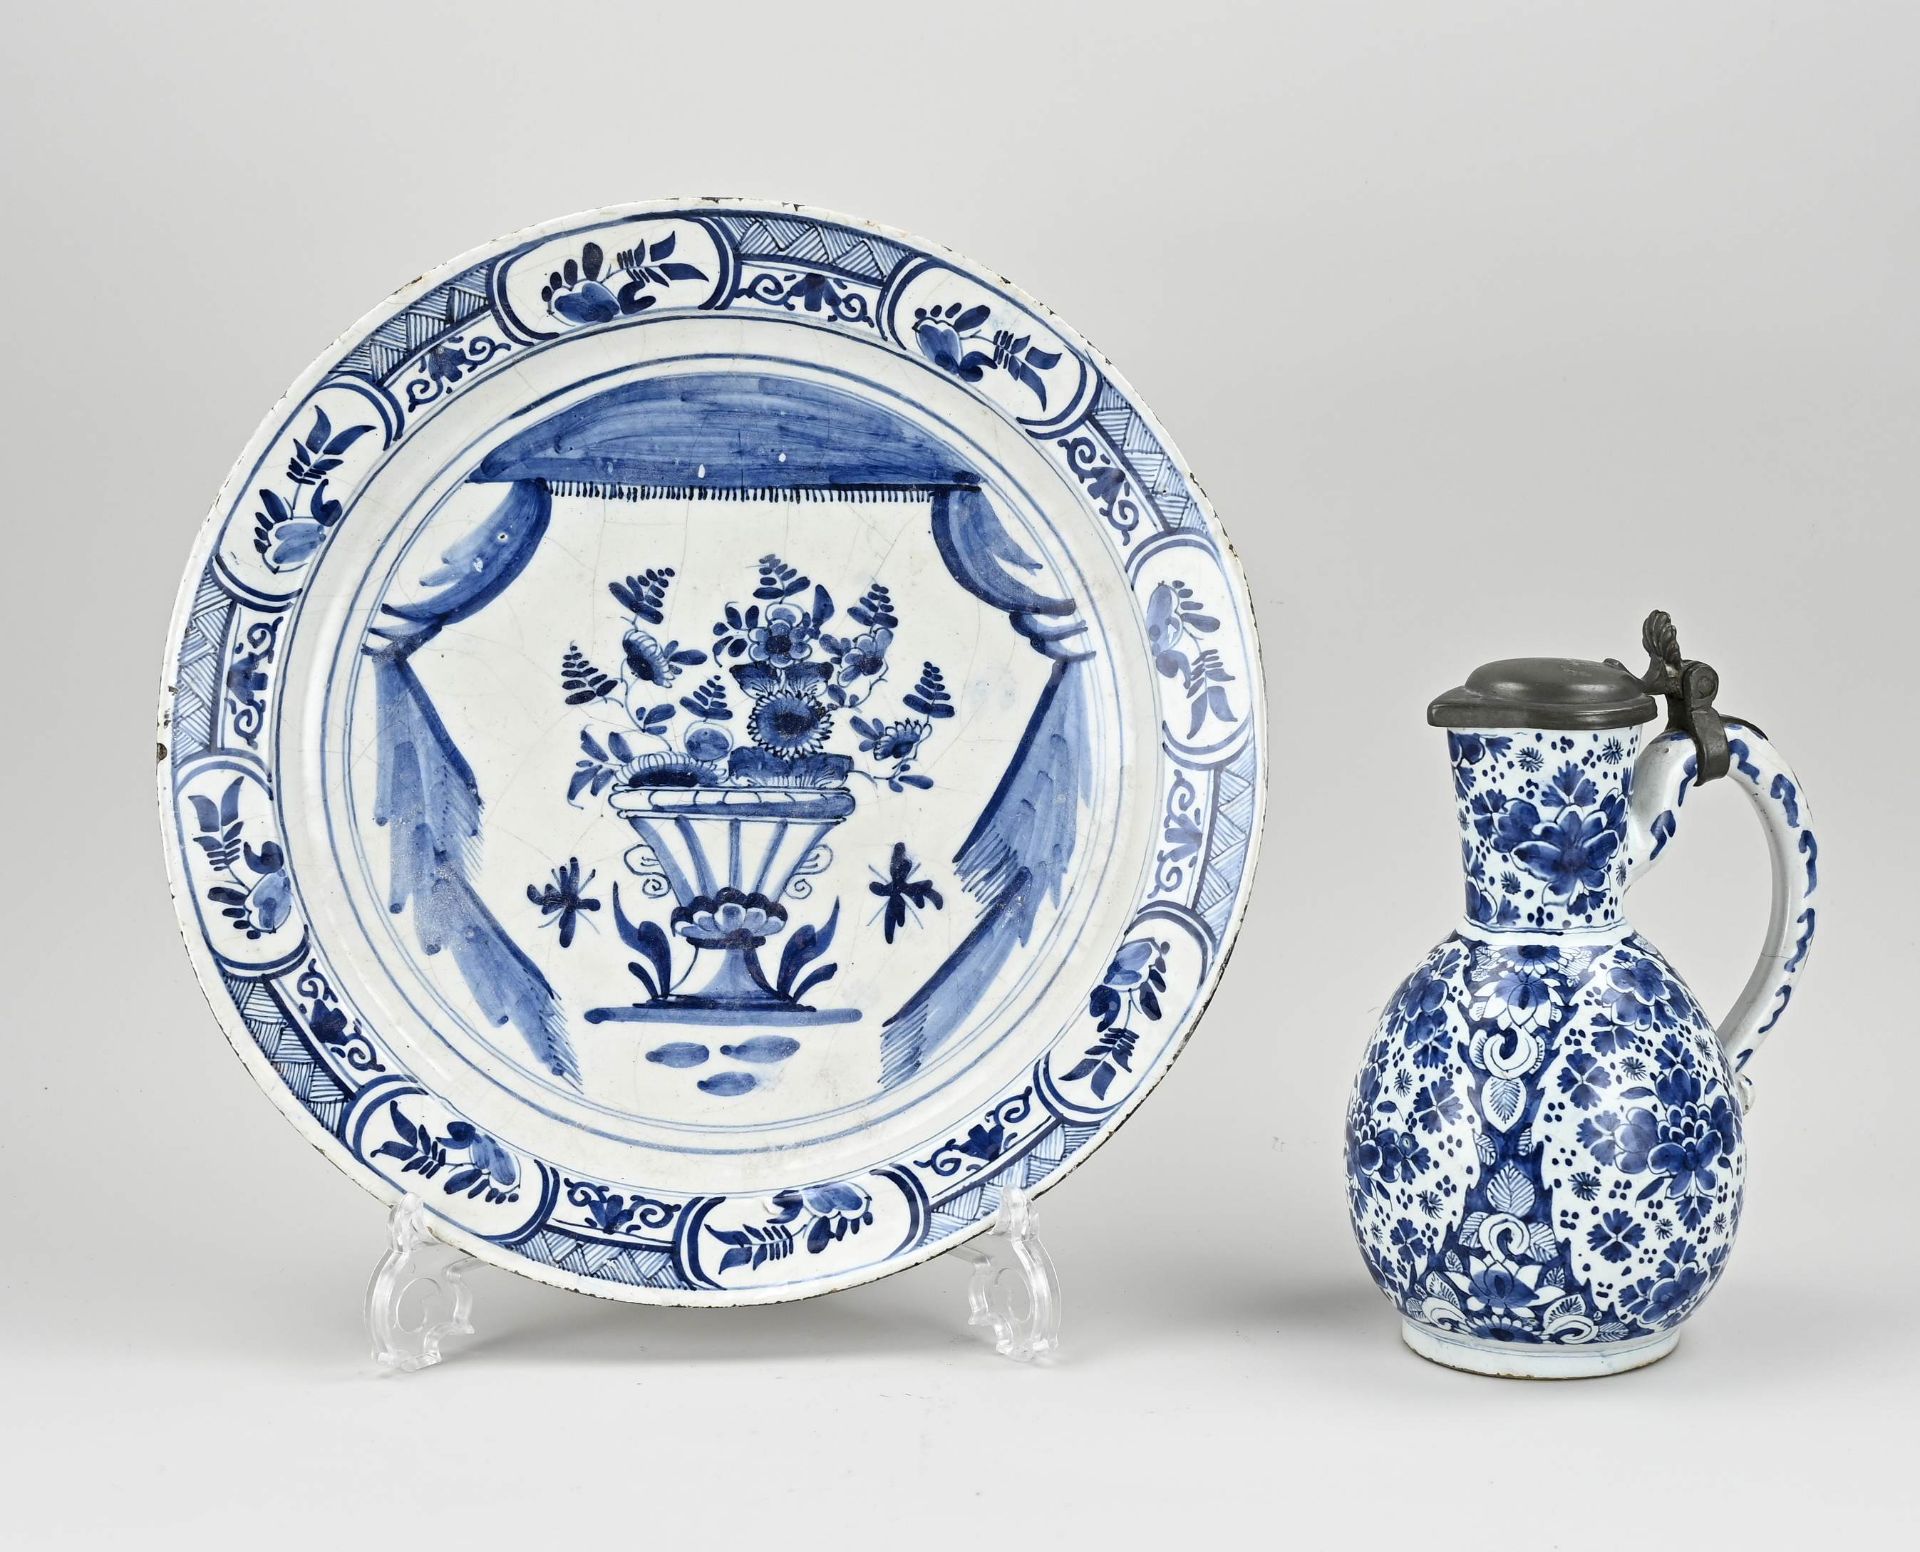 Two volumes of Delft fayence